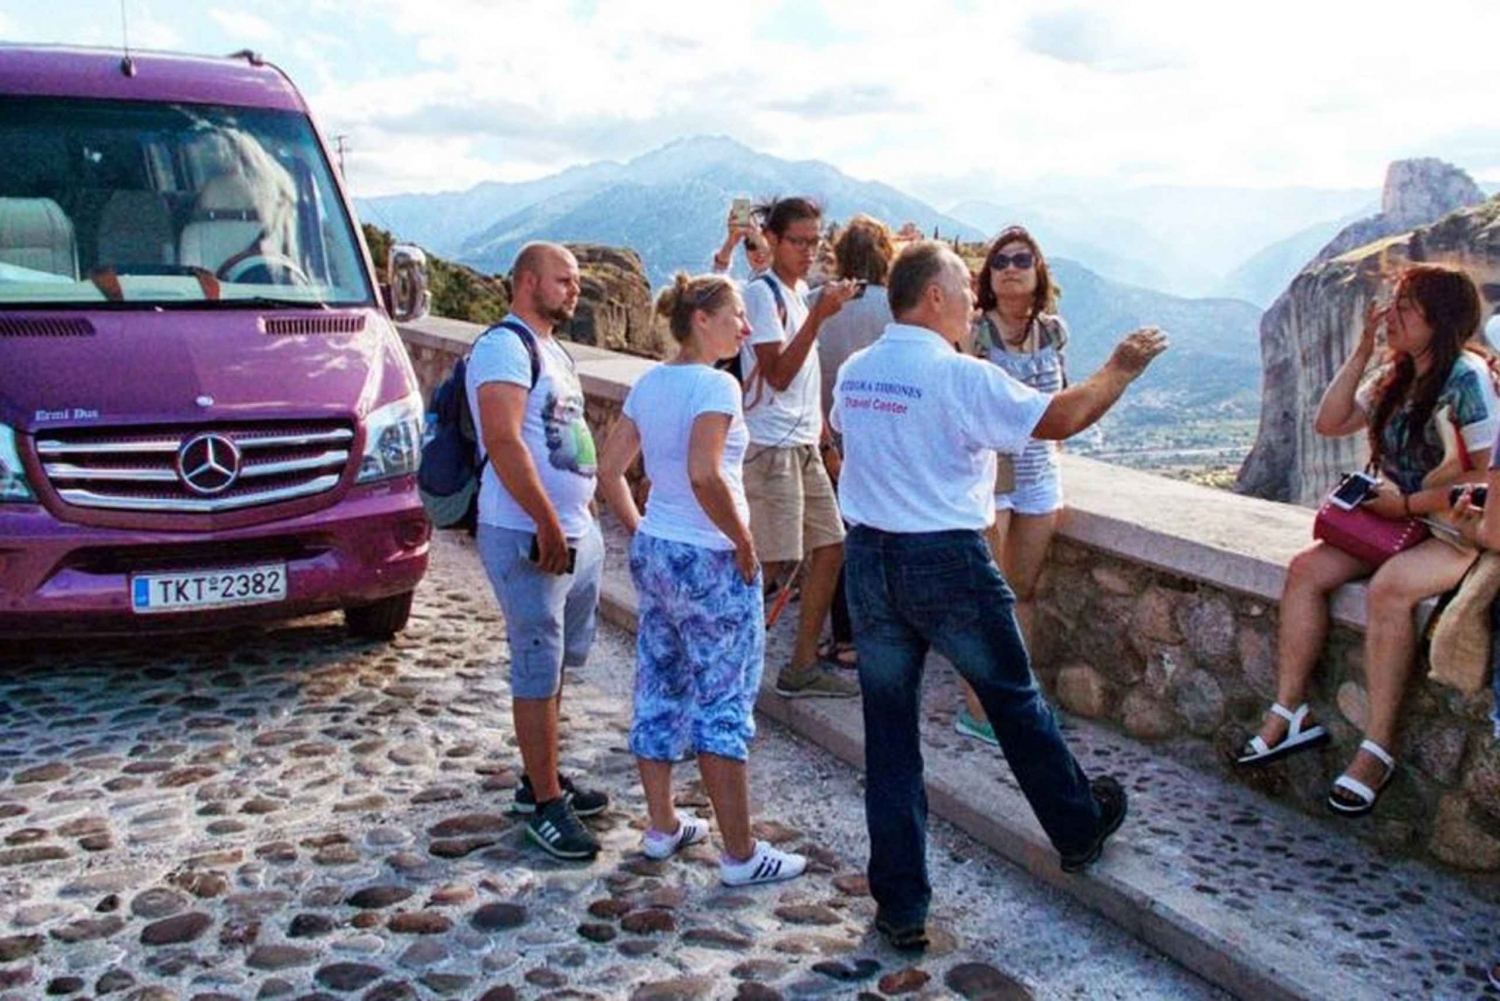 From Athens: Explore Meteora with a Guided Bus Tour